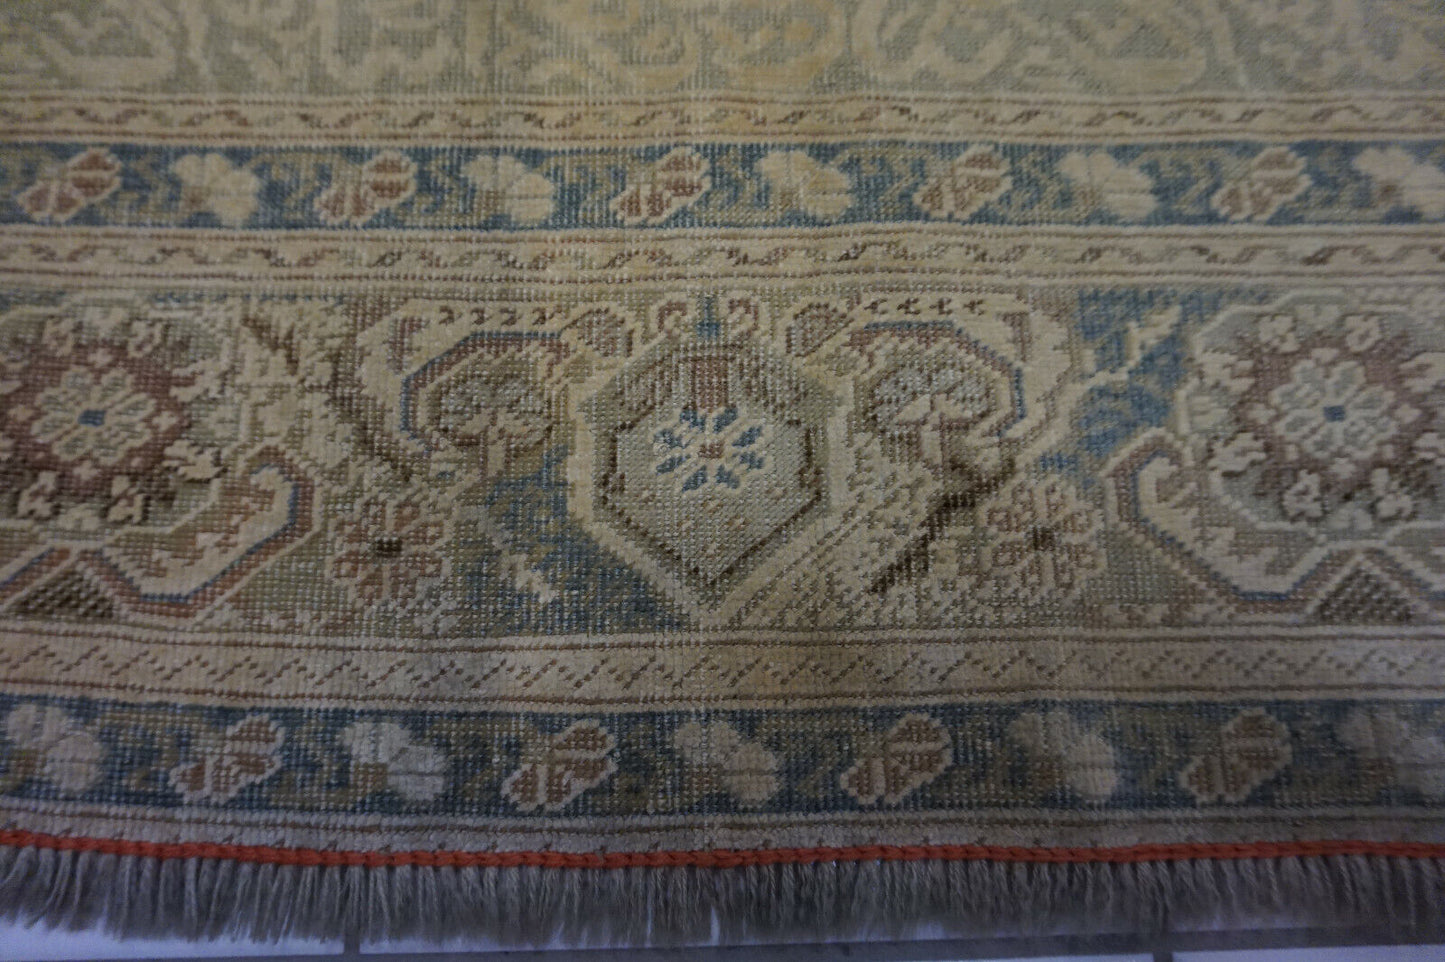  Side view of the Turkish Transilvania prayer rug highlighting its rectangular shape and size